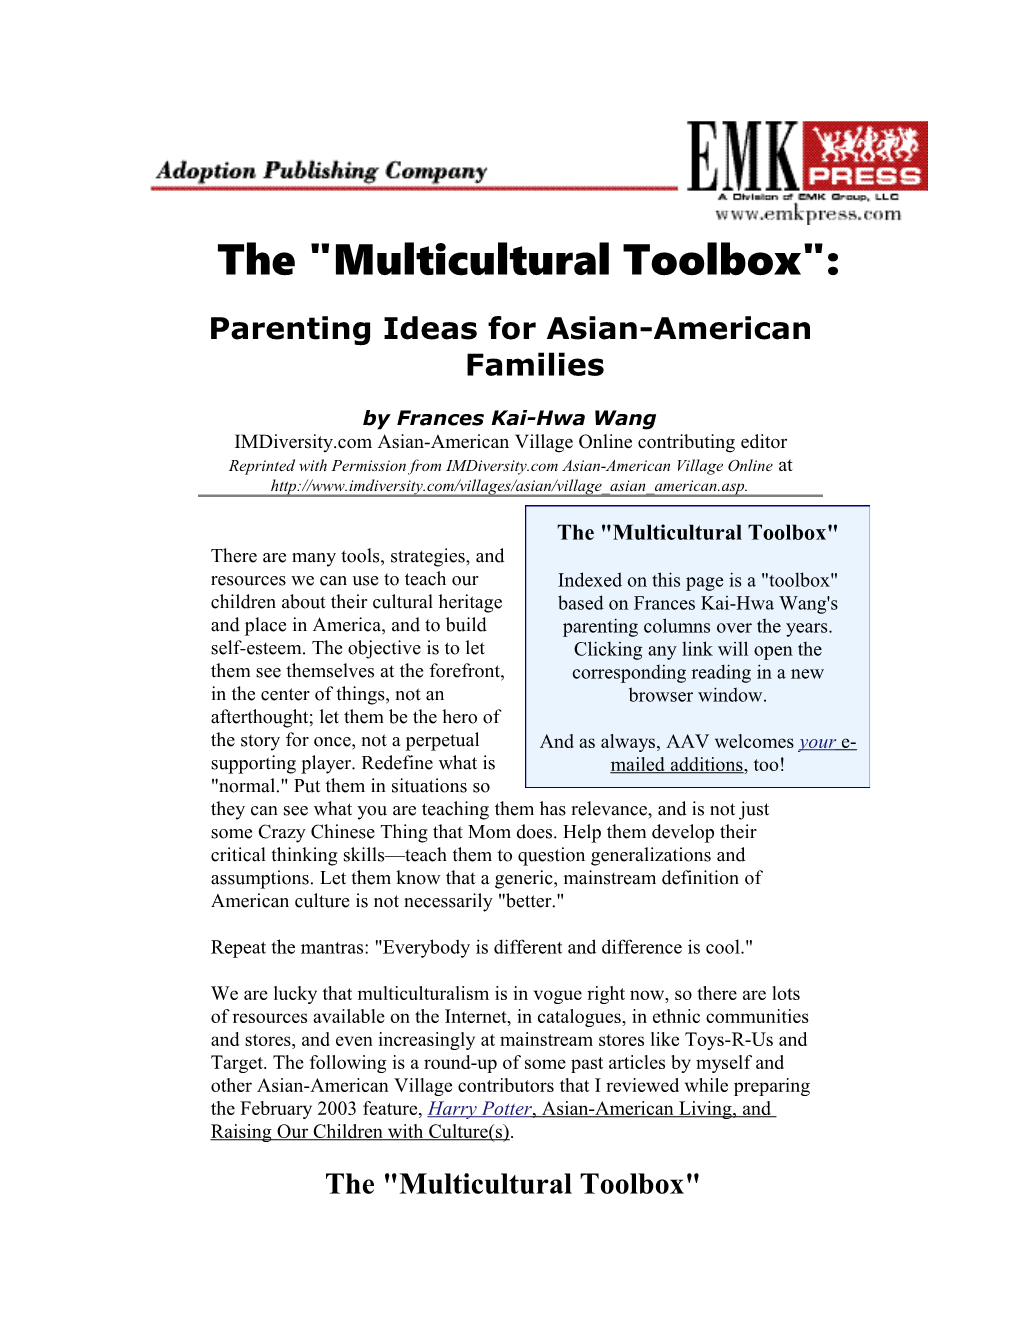 The Multicultural Toolbox